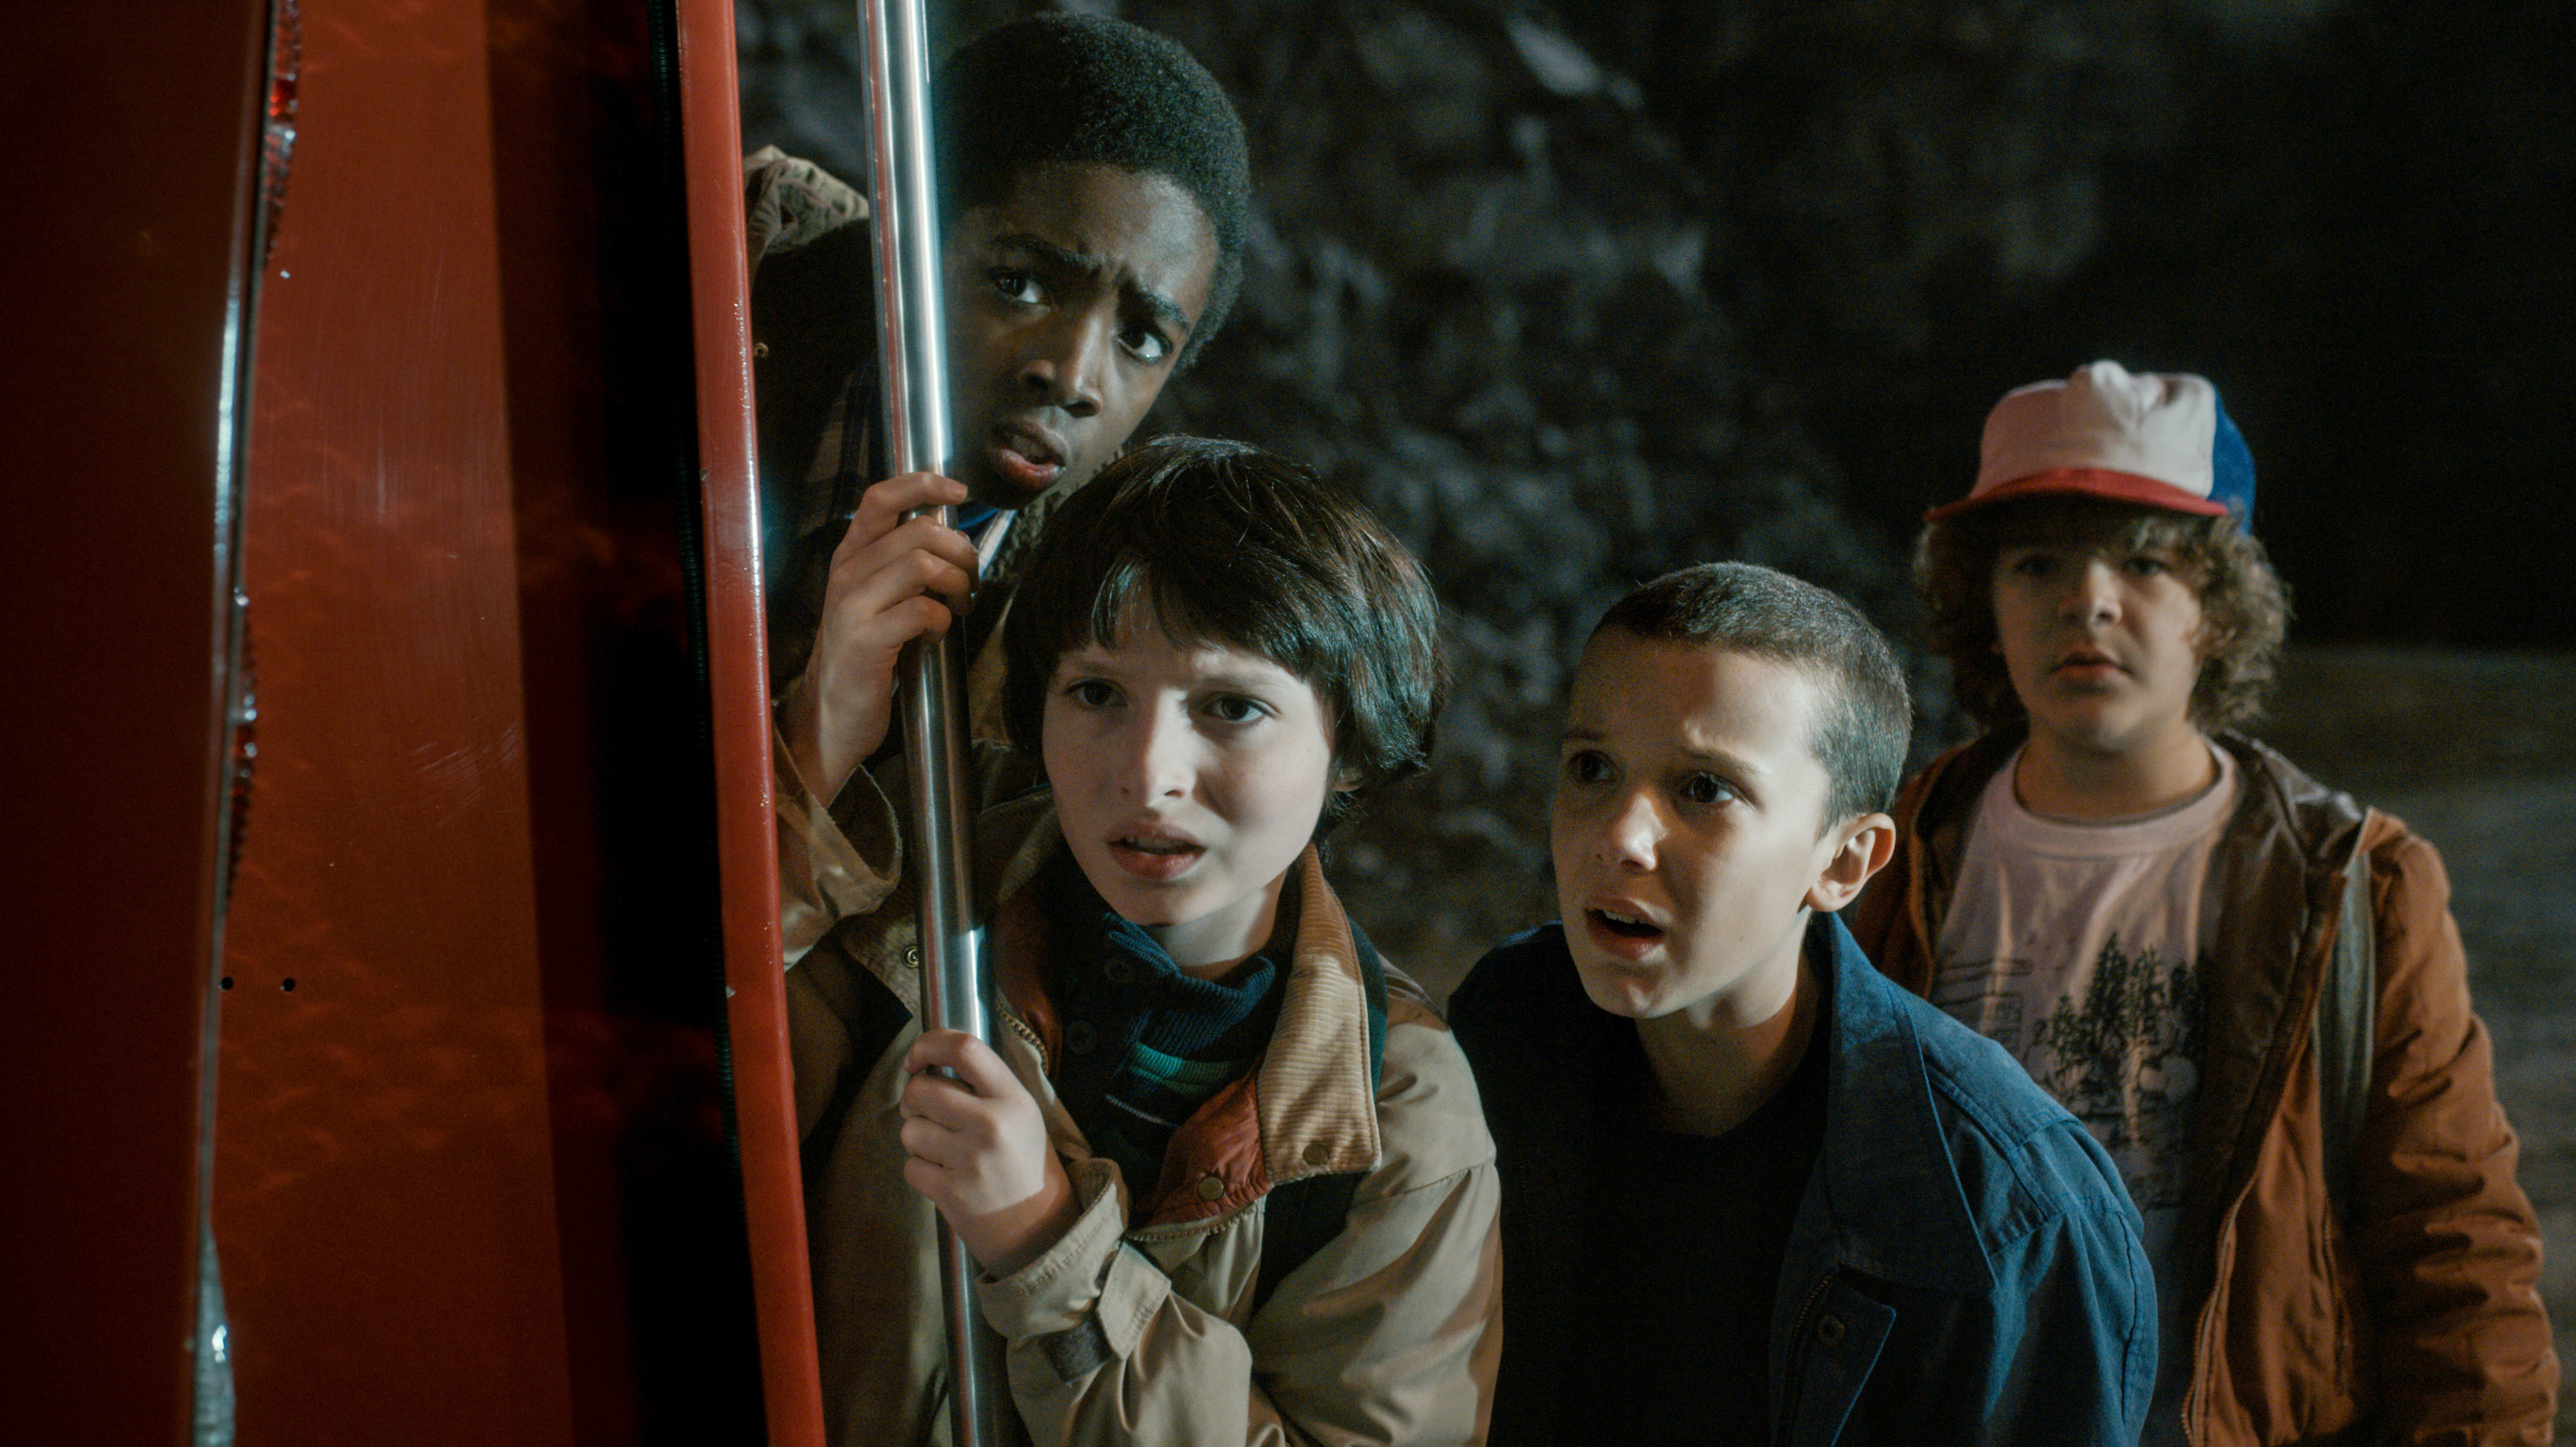 Mike, Eleven, Lucas, and Dustin carefully peeking at something